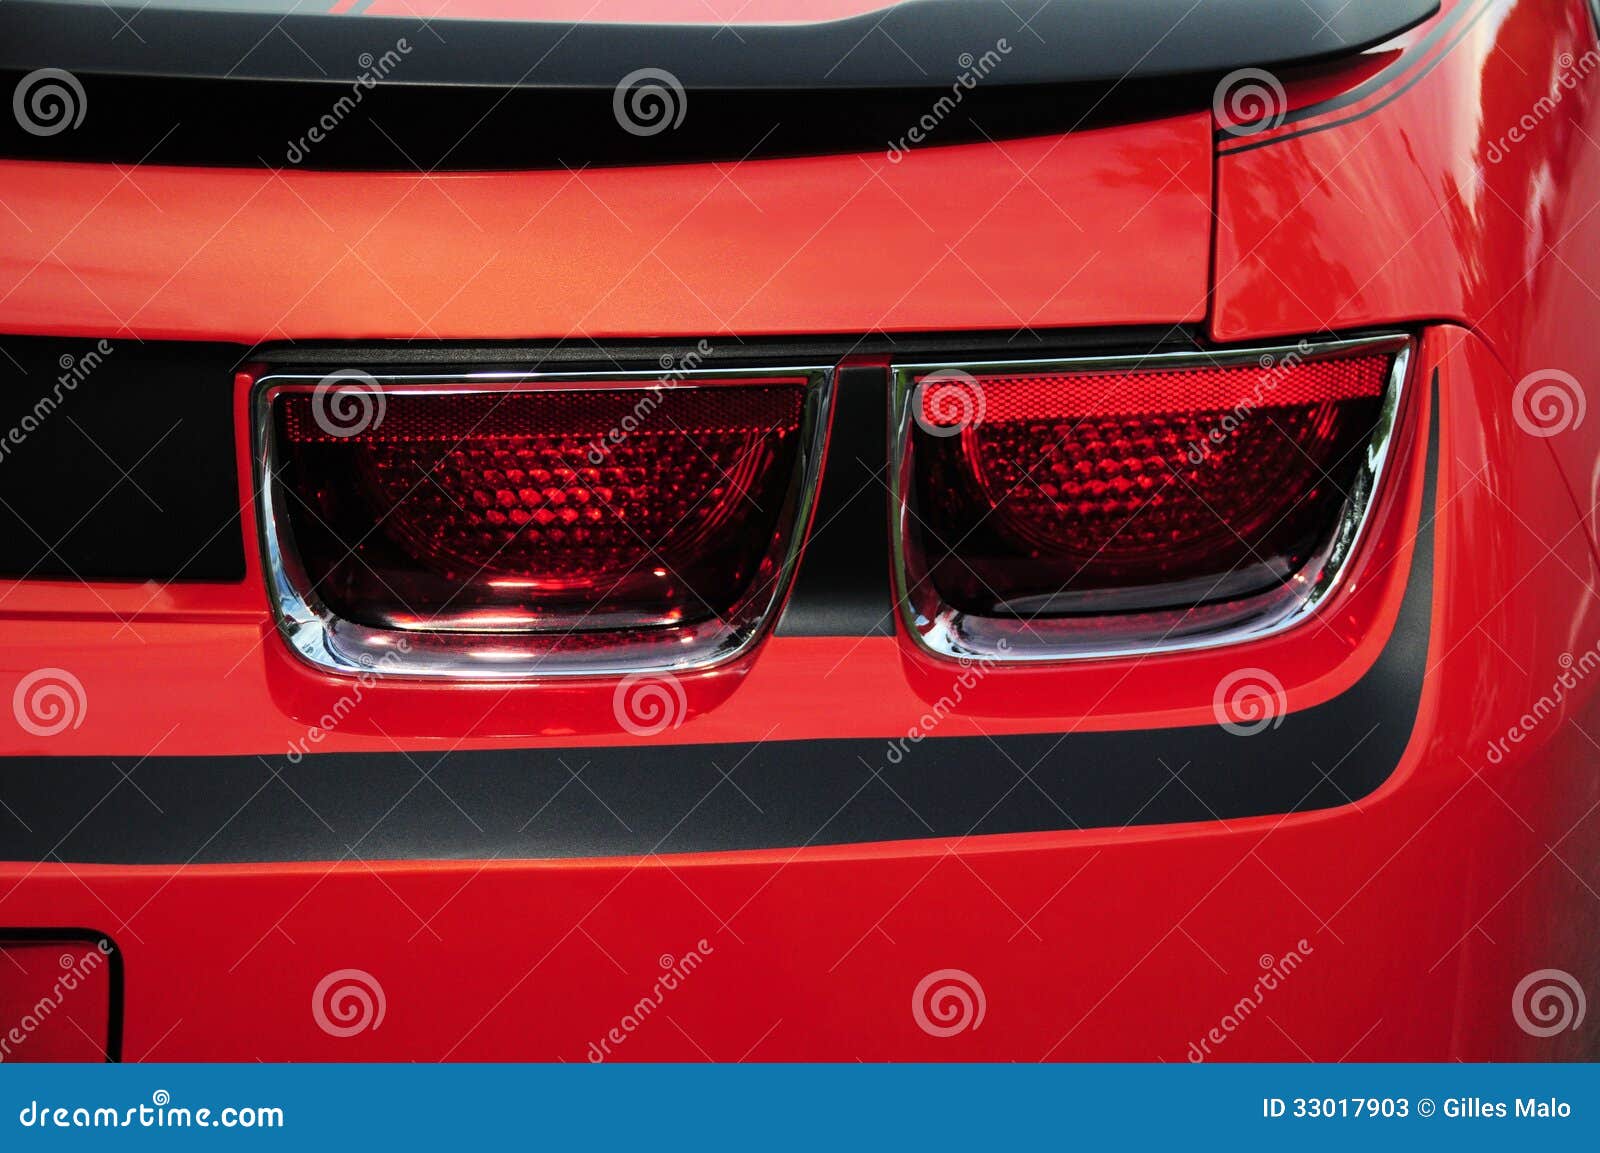 Rear Lights Of Red Sports Car Stock Image